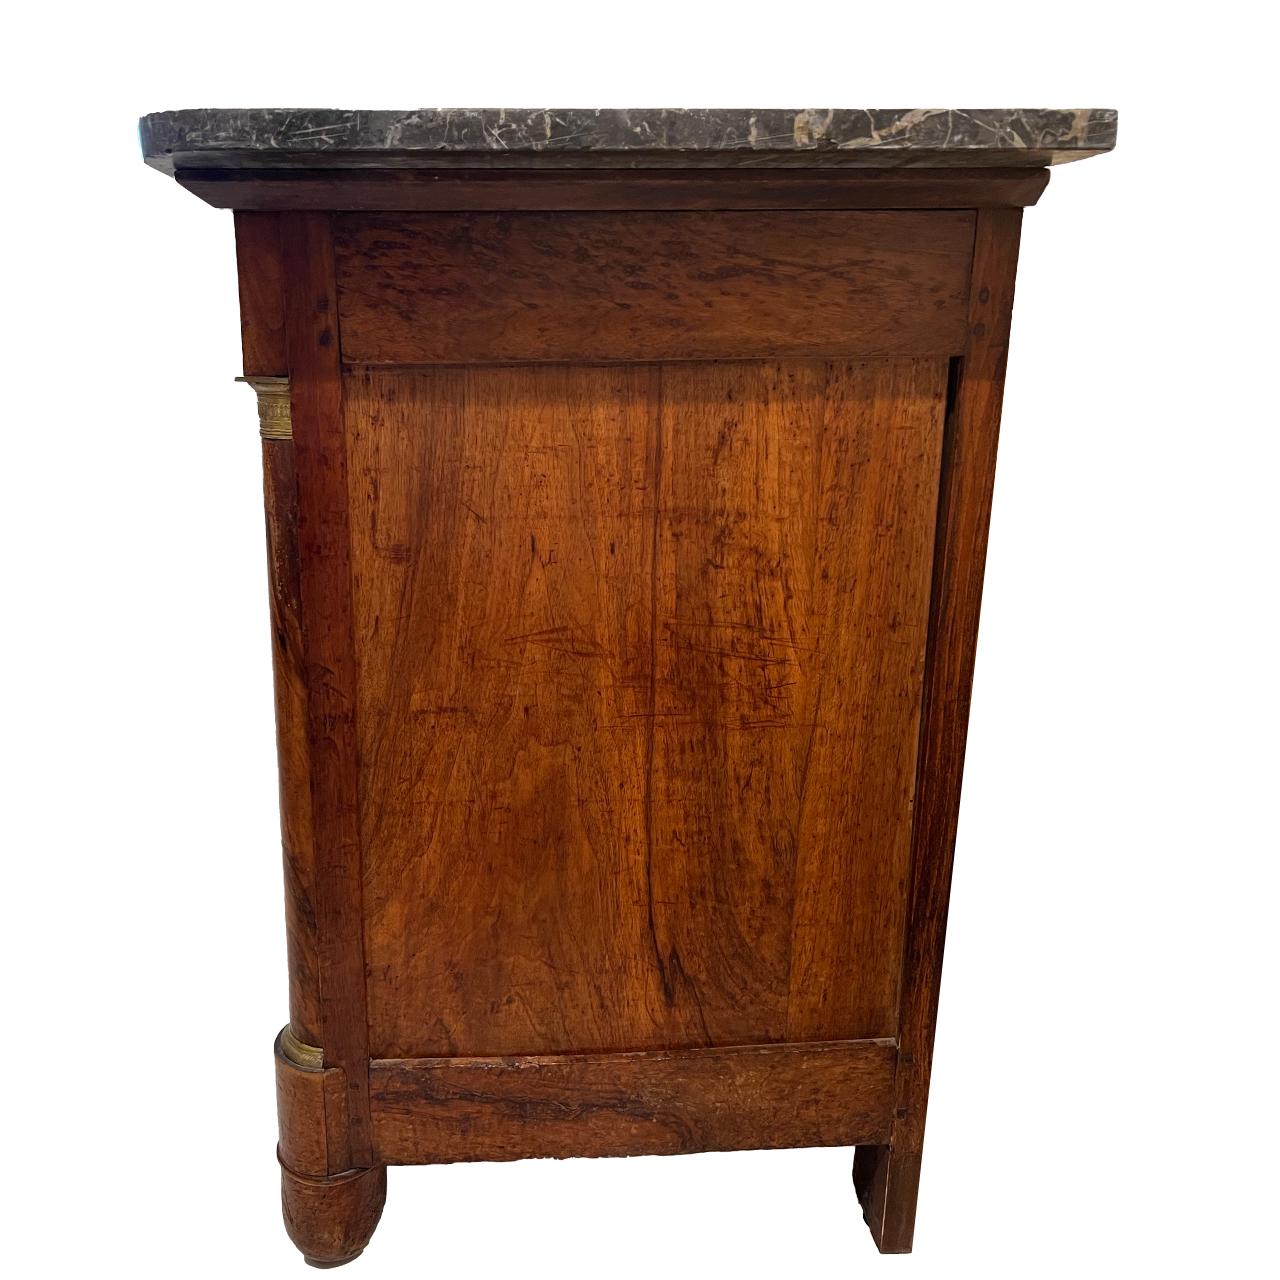 French Empire Commode with Marble Top, 19th Century